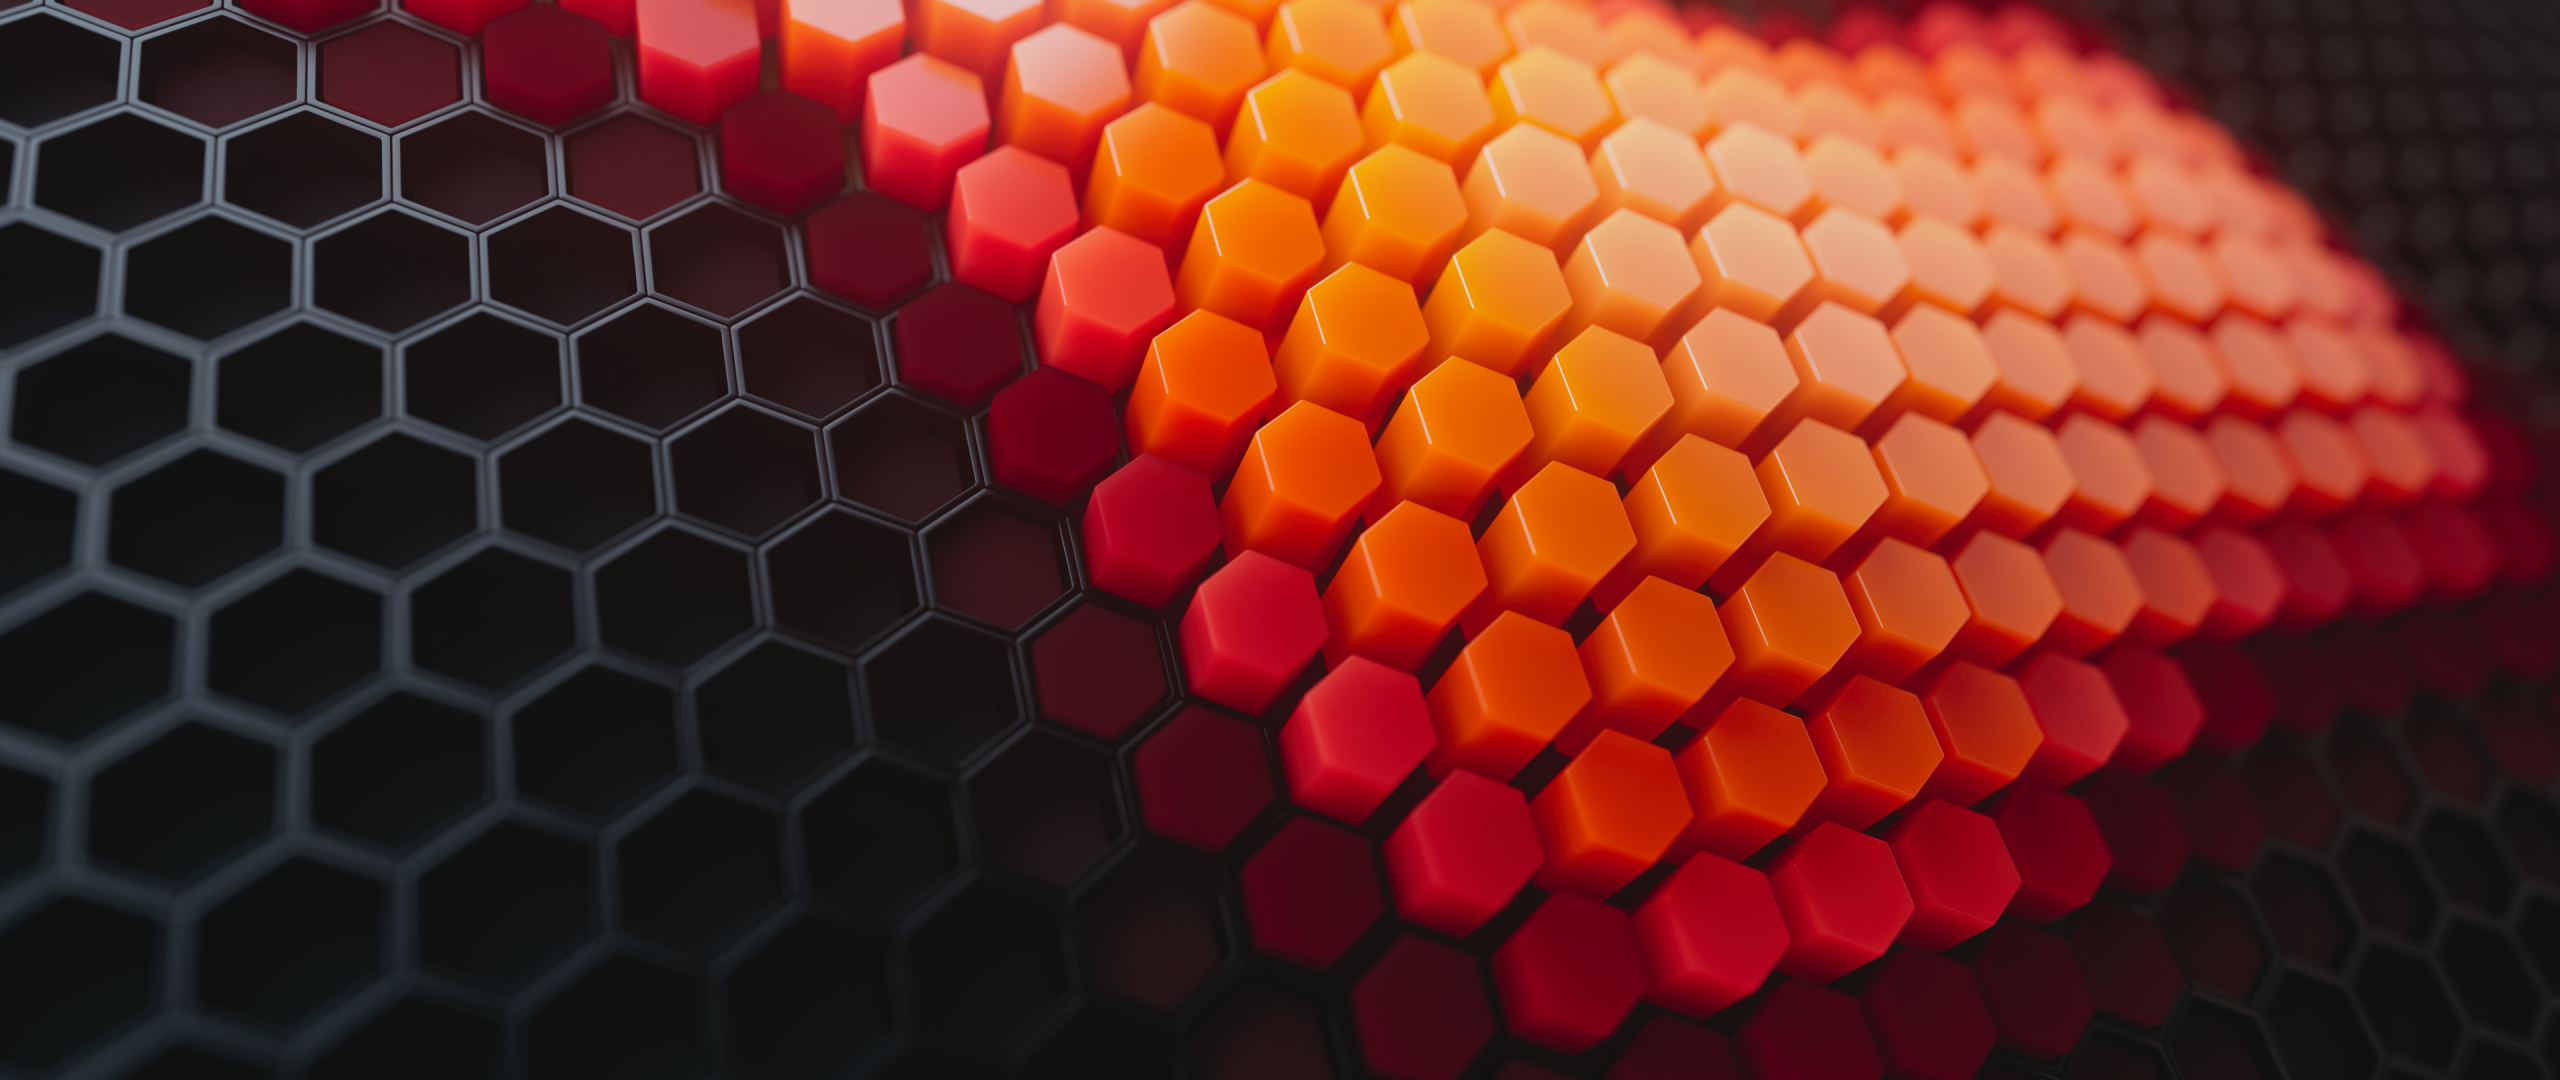 The hexagonal shape has always been associated with harmony and balance, and our hexagon 4K wallpapers will definitely bring those qualities to your digital workspace. Featuring a range of colors, styles, and designs, these wallpapers are perfect for those who appreciate geometric beauty.